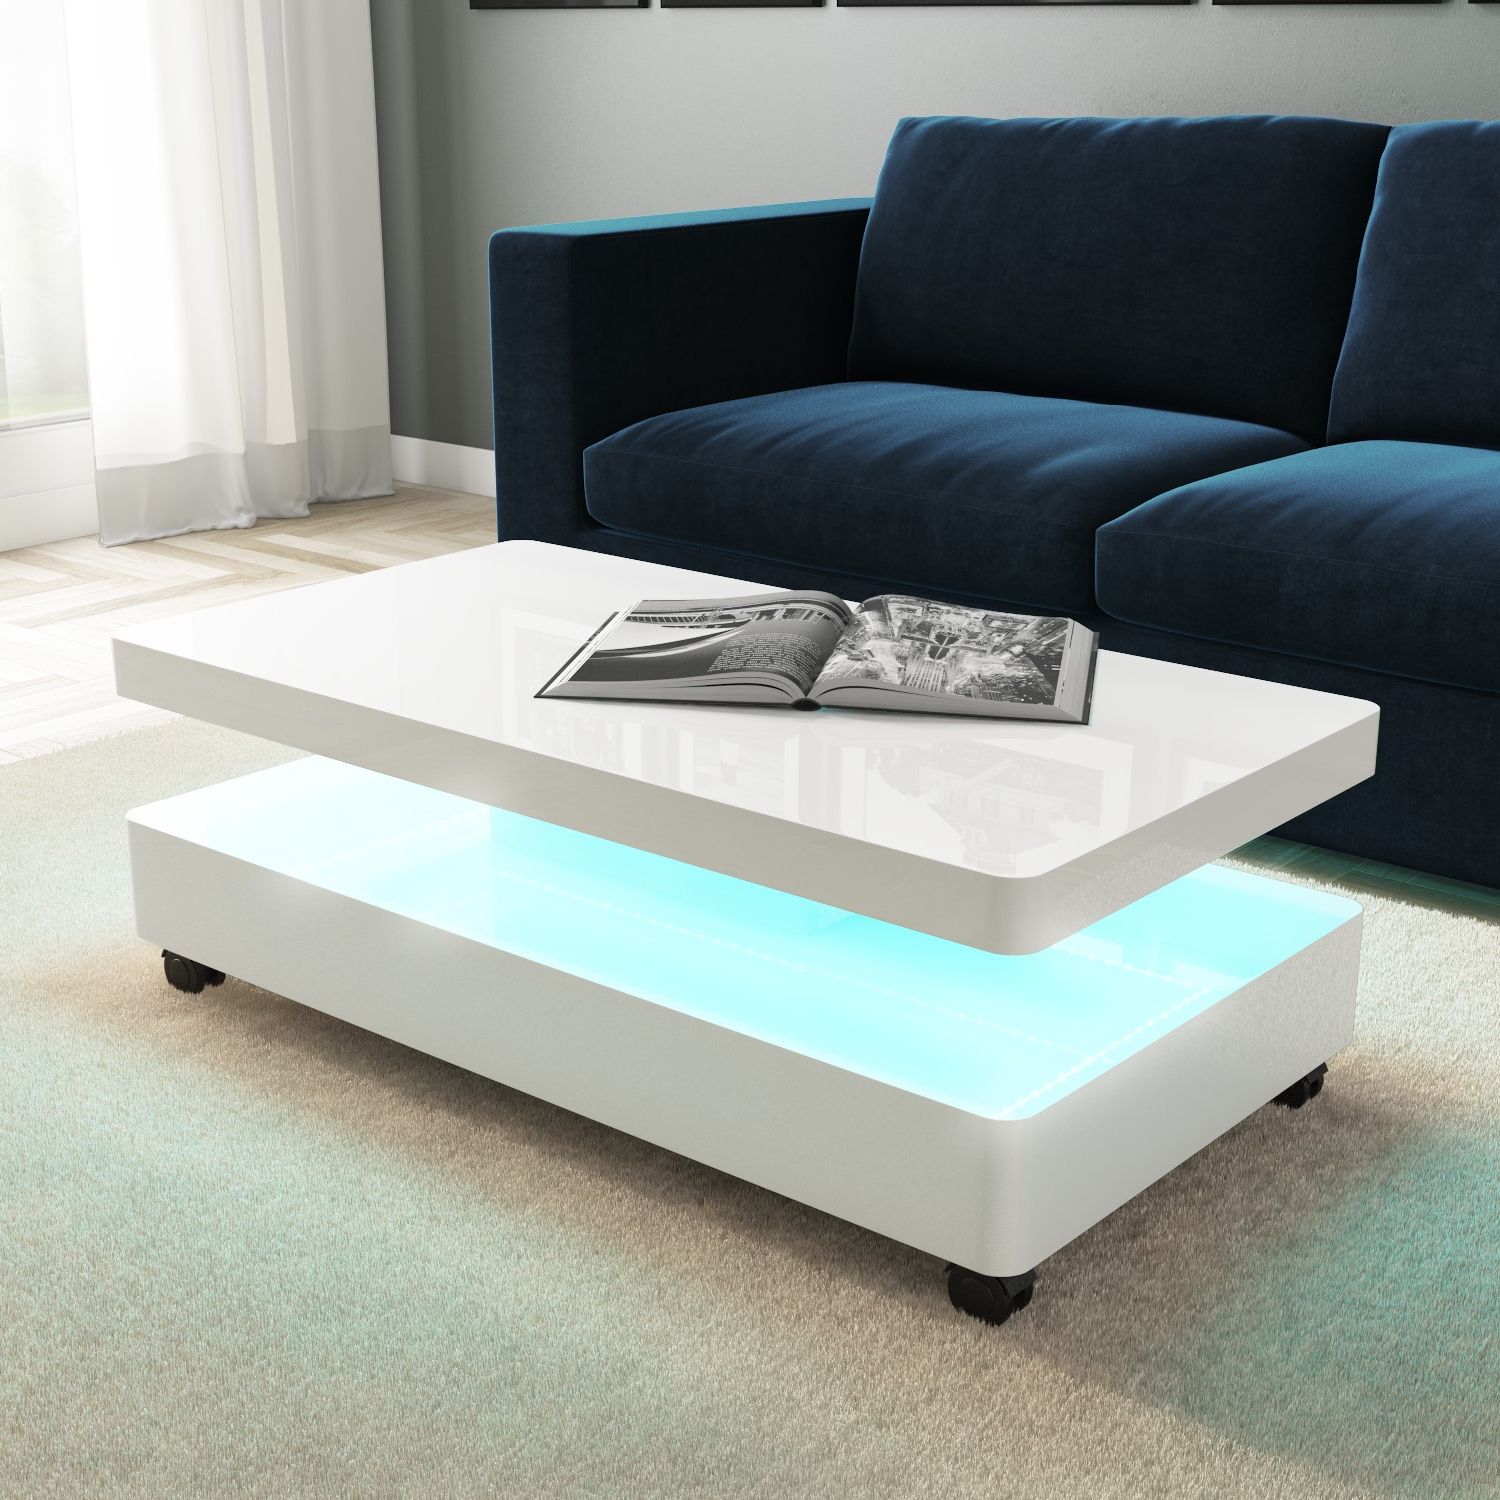 Ebay Regarding Latest Led Coffee Tables With 4 Drawers (View 13 of 15)